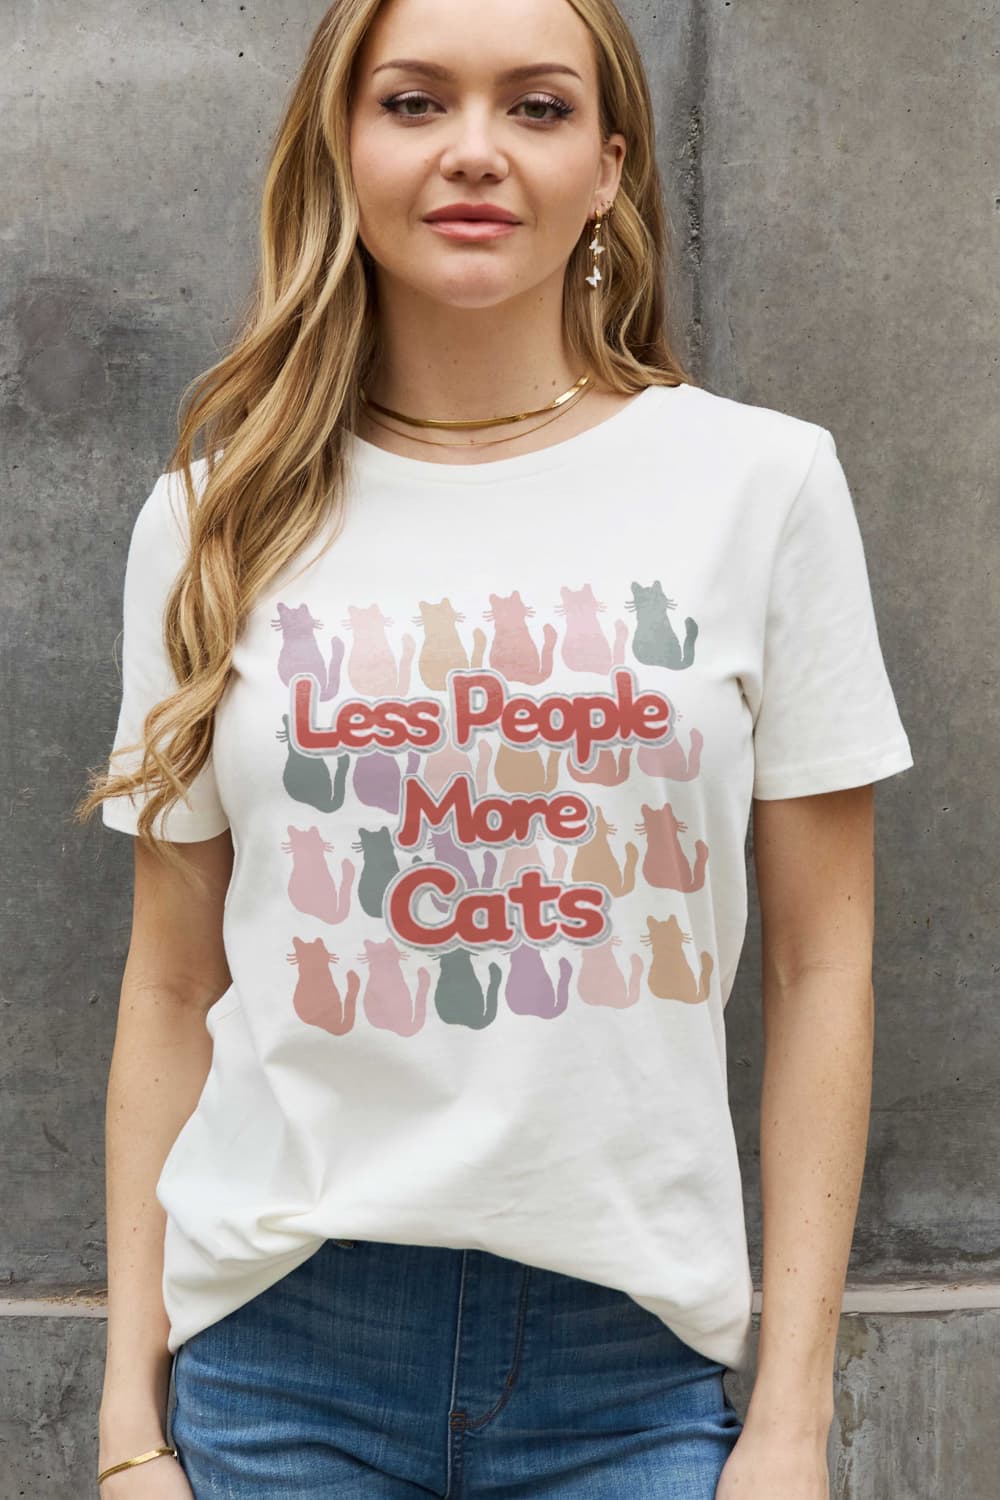 LESS PEOPLE MORE CATS Graphic Cotton Tee - White / S - T-Shirts - Shirts & Tops - 1 - 2024